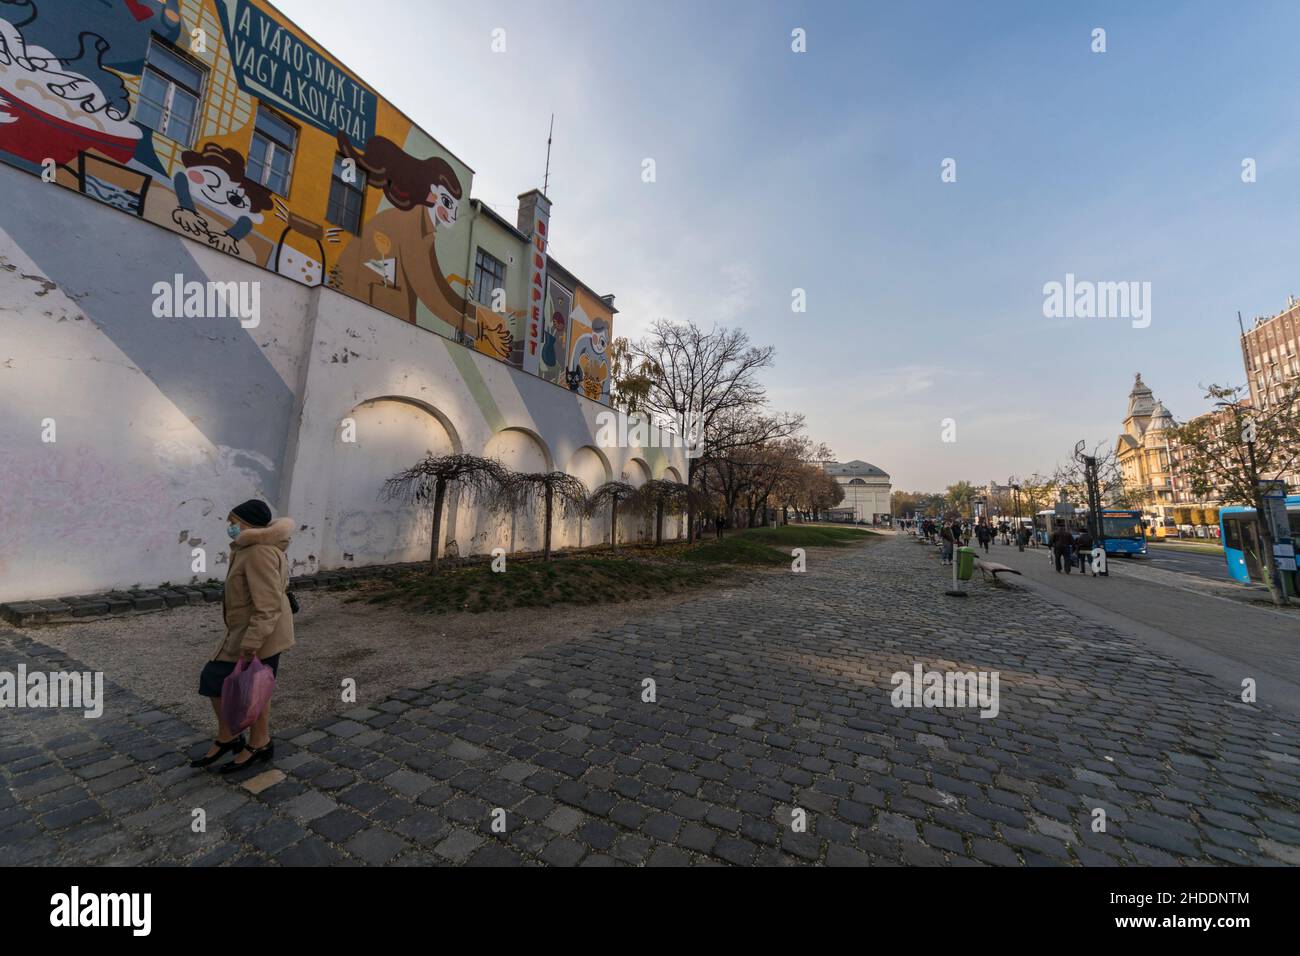 Budapest, Hungary. People passing near a street painting on Károly körút in central Budapest. Stock Photo